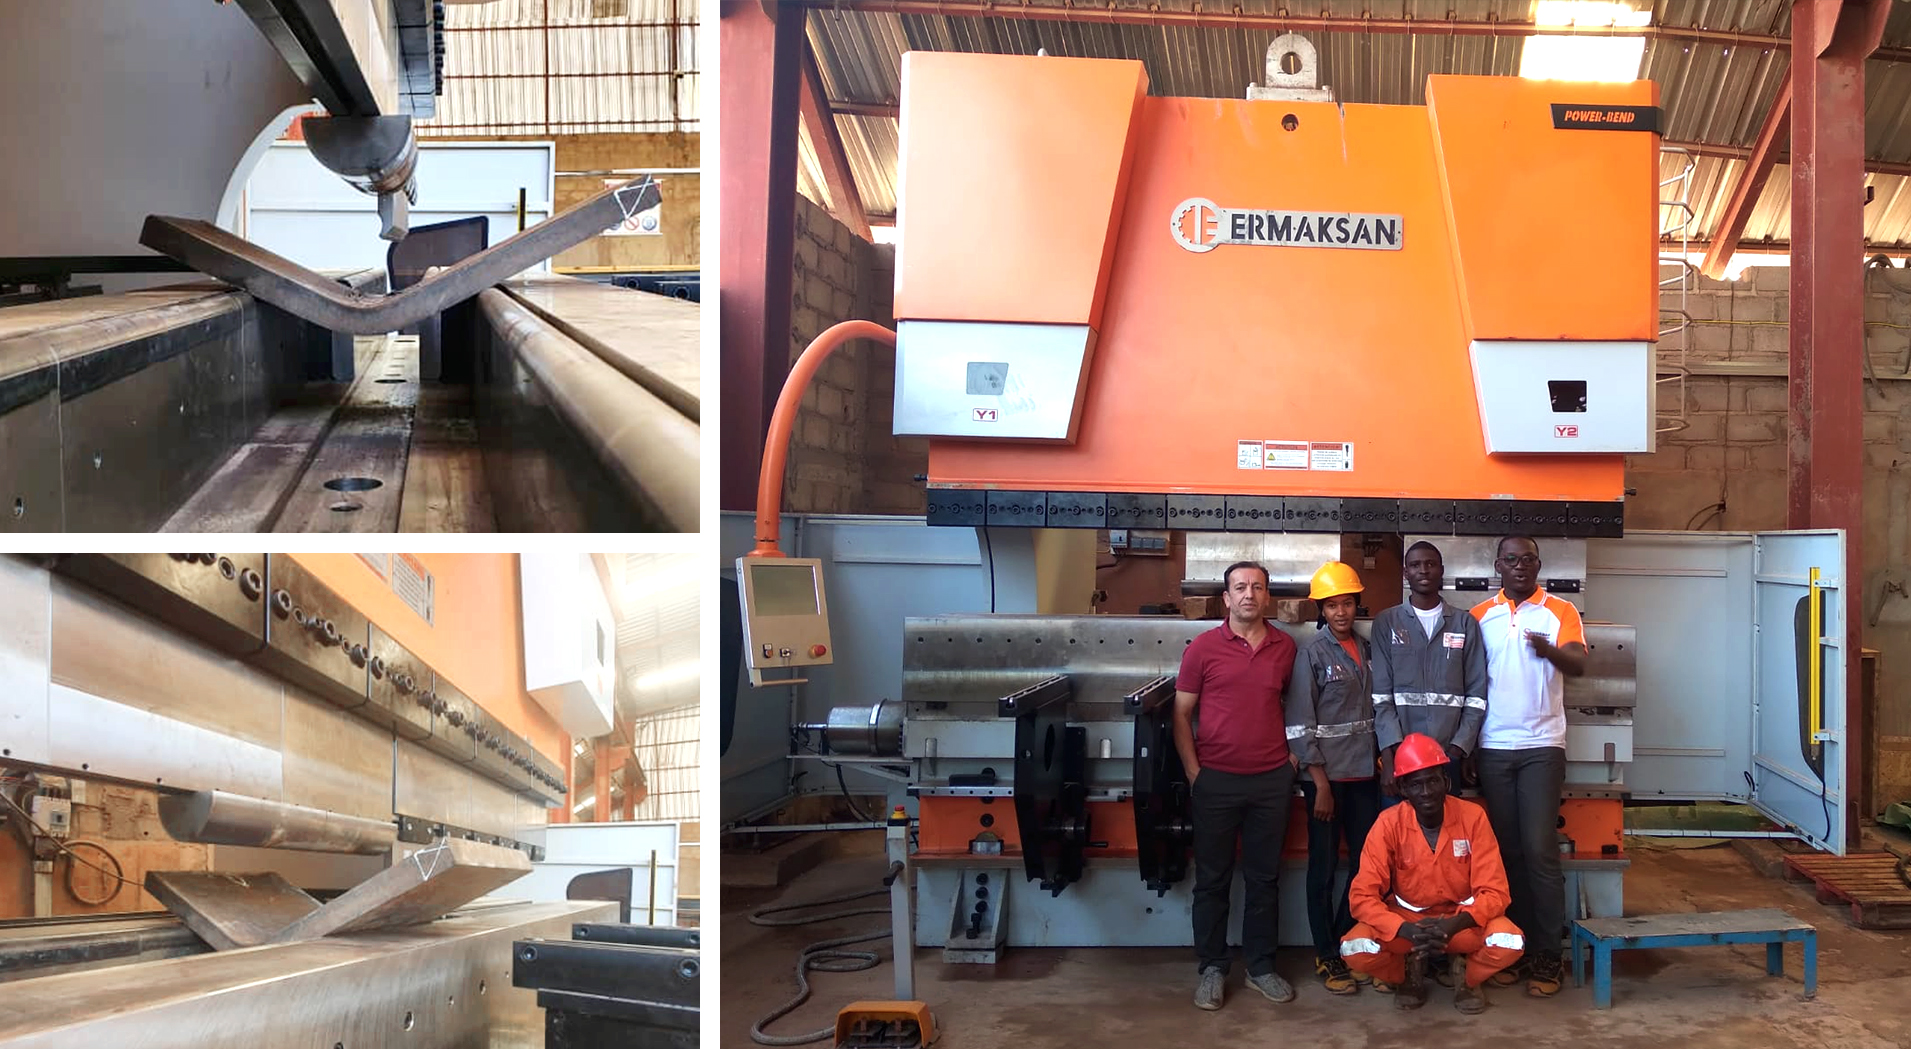 Ermaksan Machine - A new country and a new excitement with brand